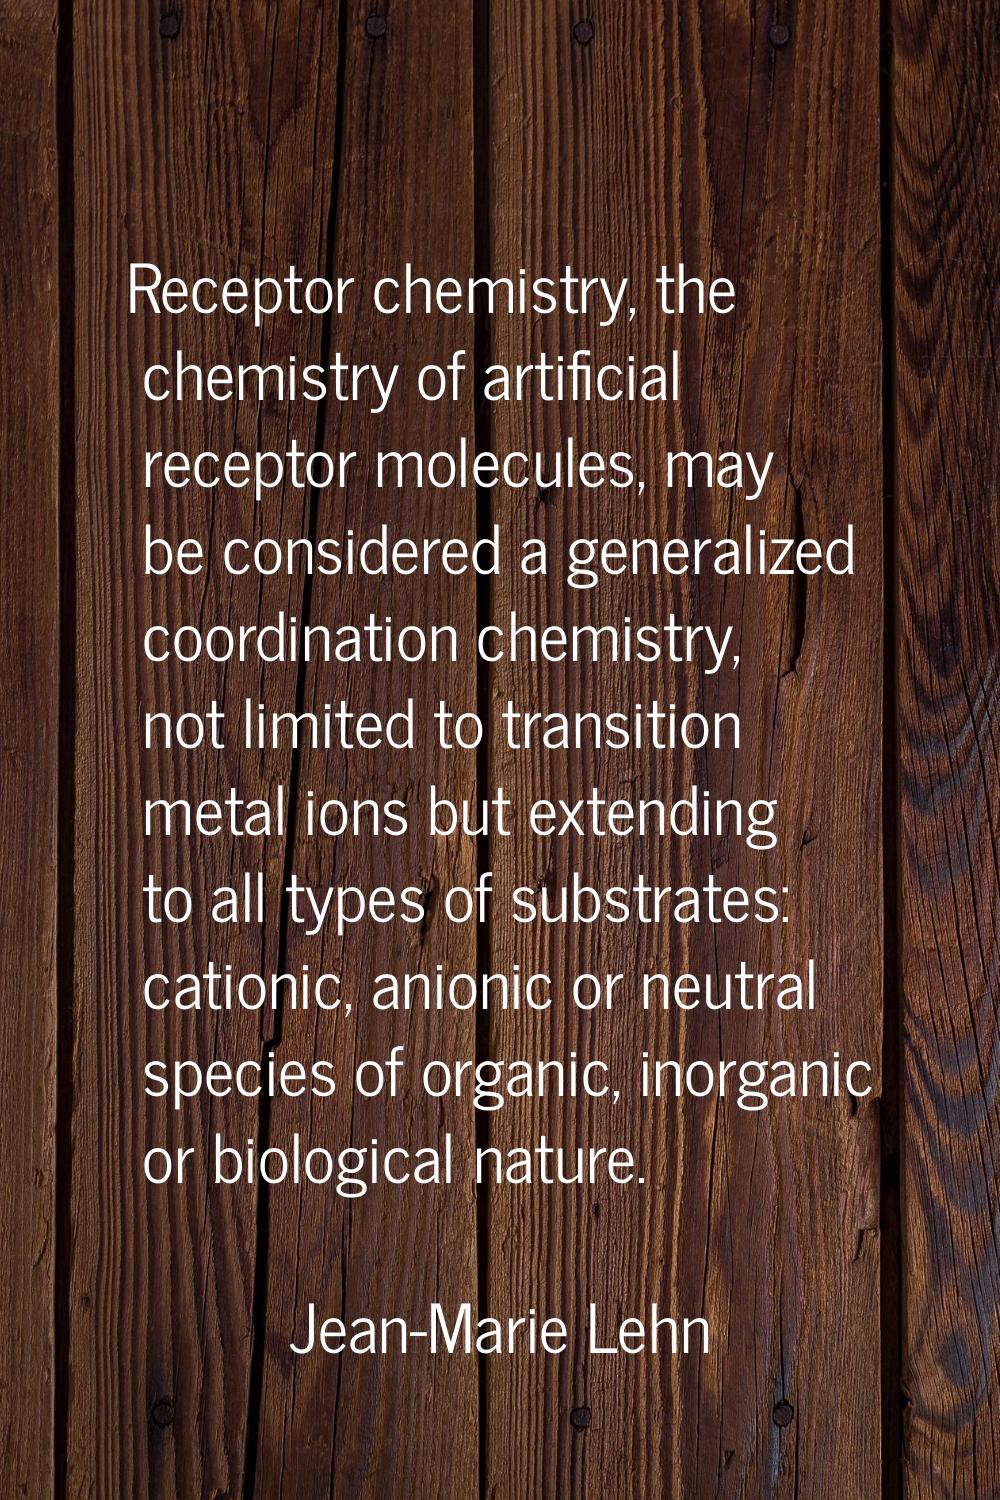 Receptor chemistry, the chemistry of artificial receptor molecules, may be considered a generalized